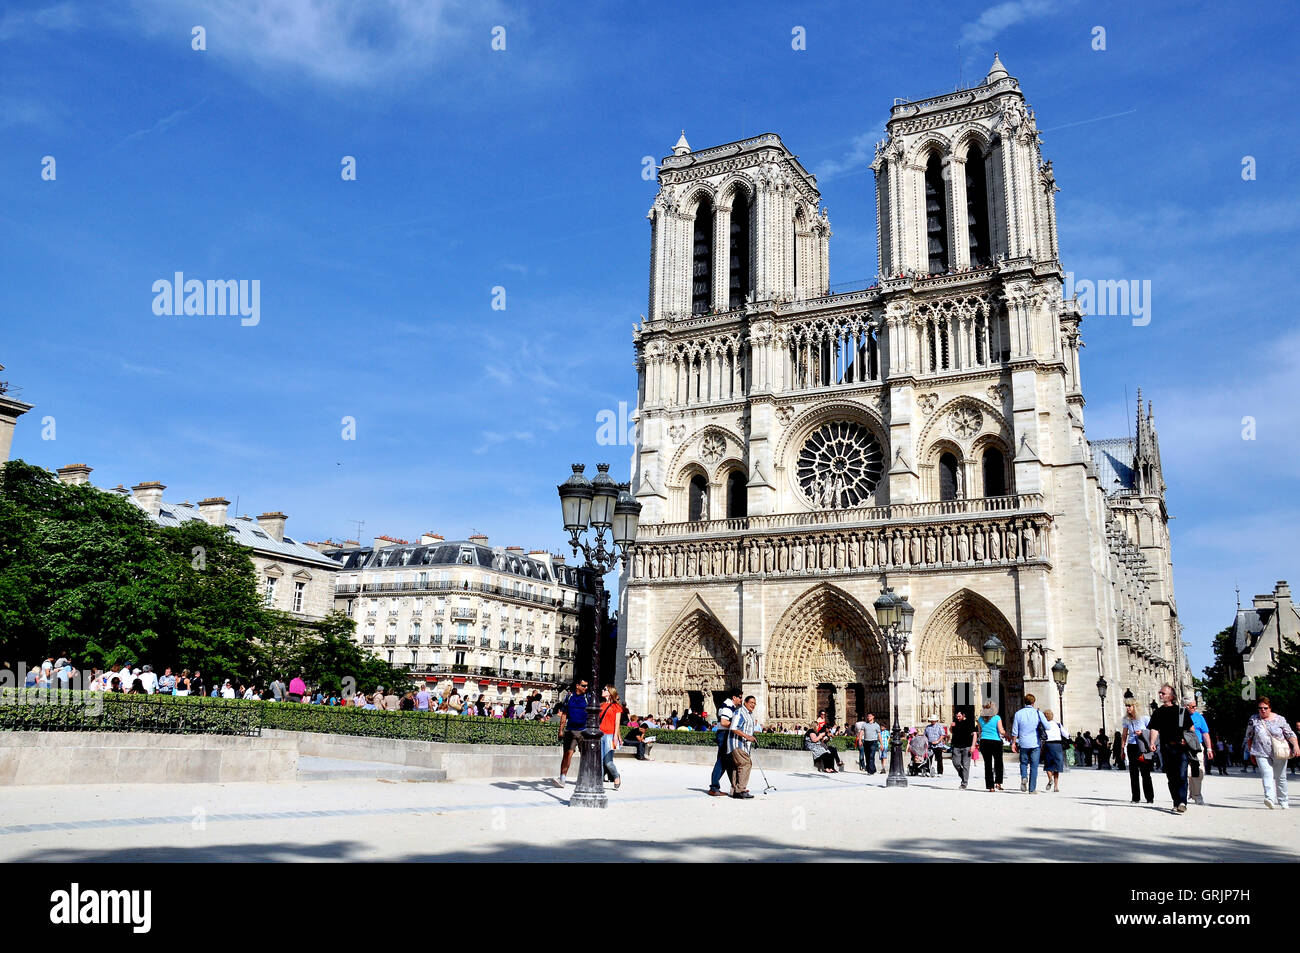 PARIS, FRANCE - MAY 7: Undefined people walking near cathedral of Notre Dame, Paris on May 7, 2011. Stock Photo